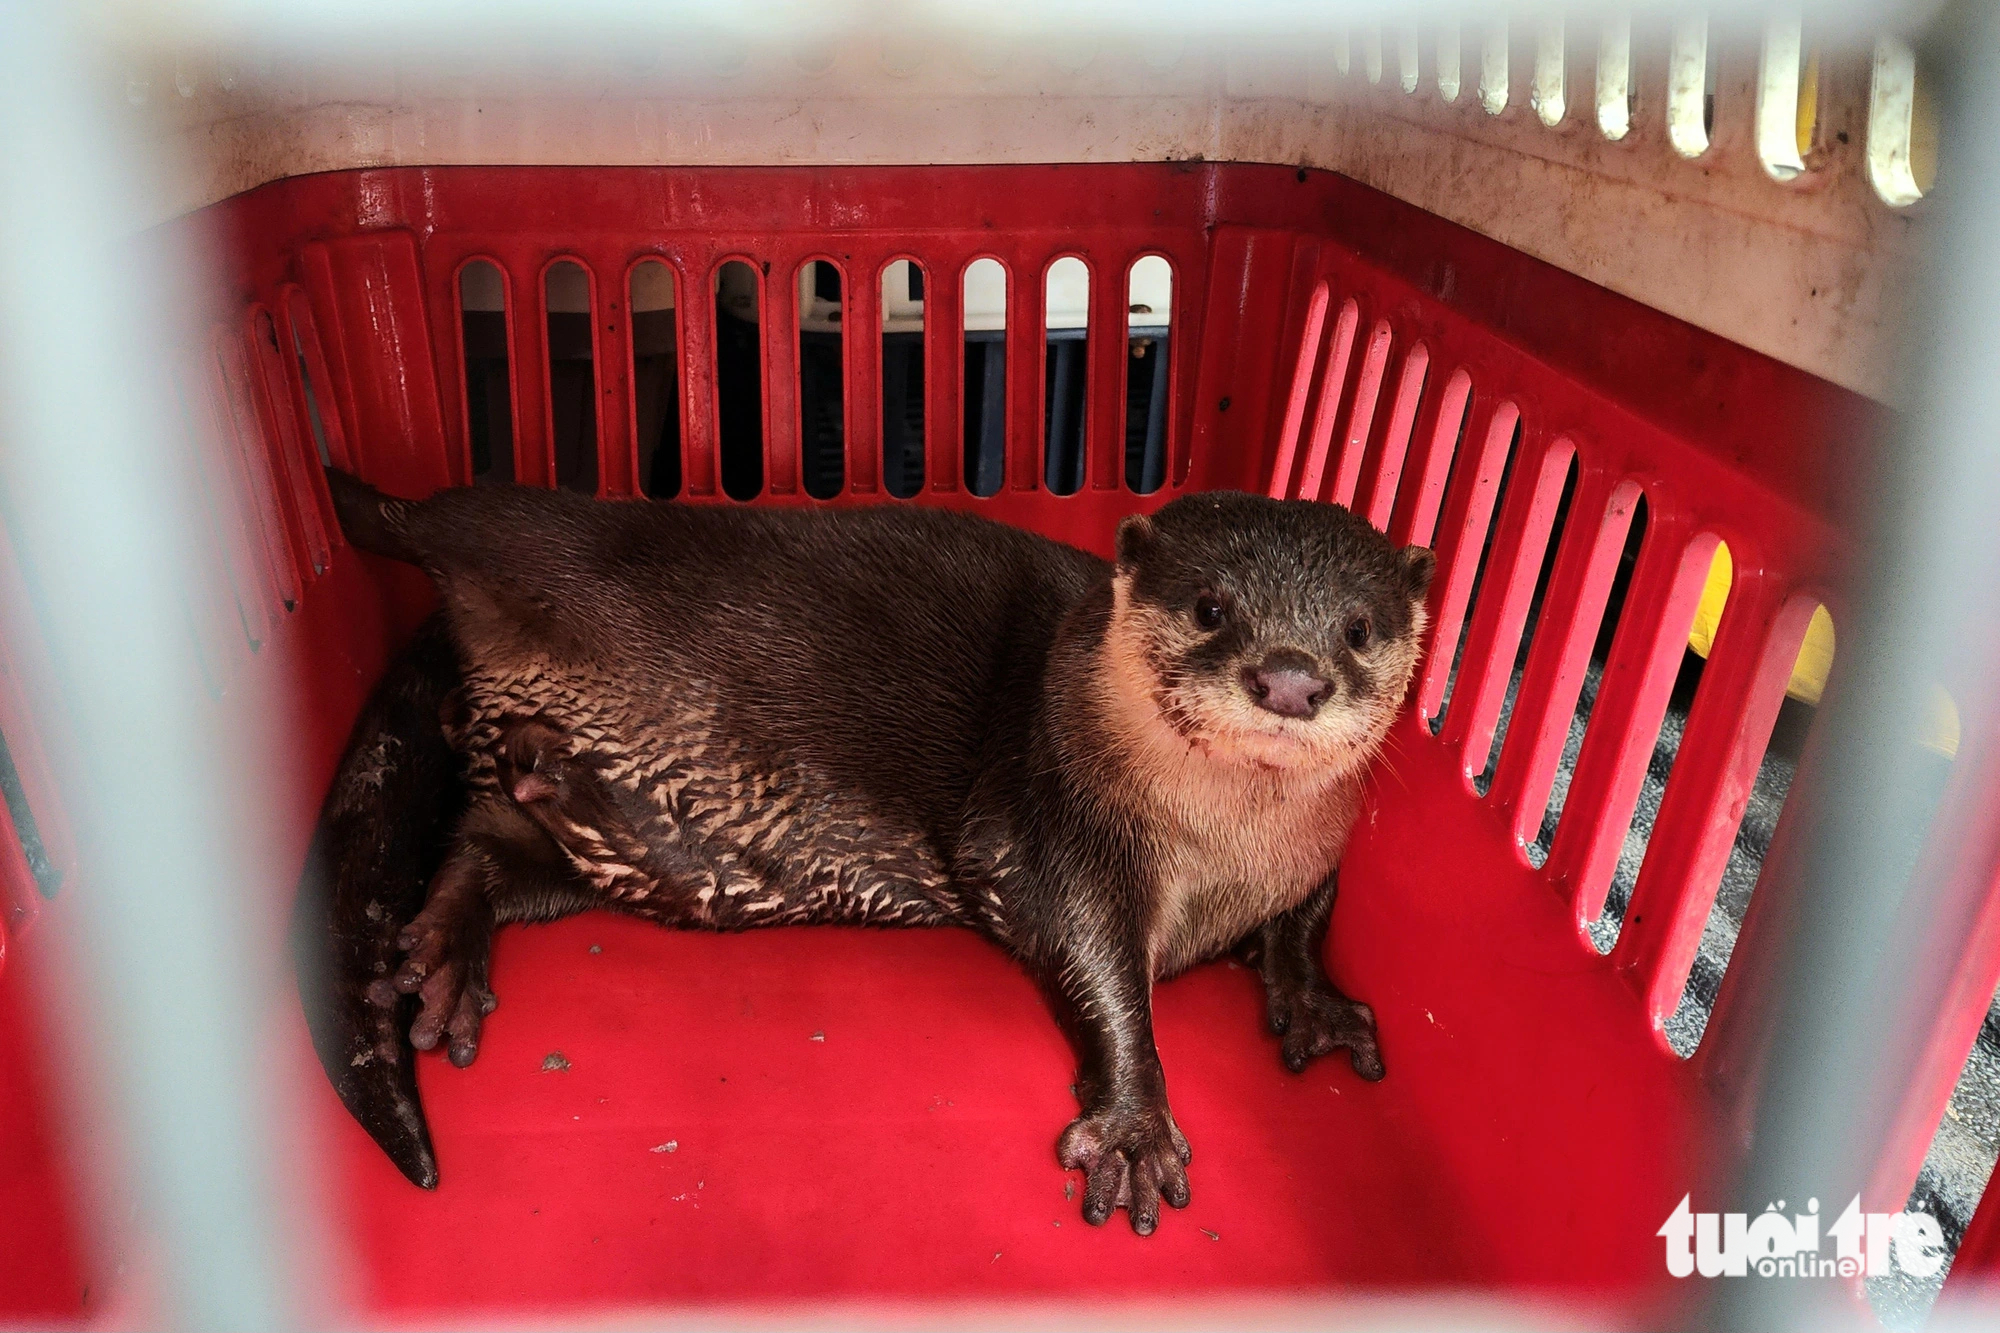 From evidence to freedom: Otter reintegrates into protected forest in Ho Chi Minh City